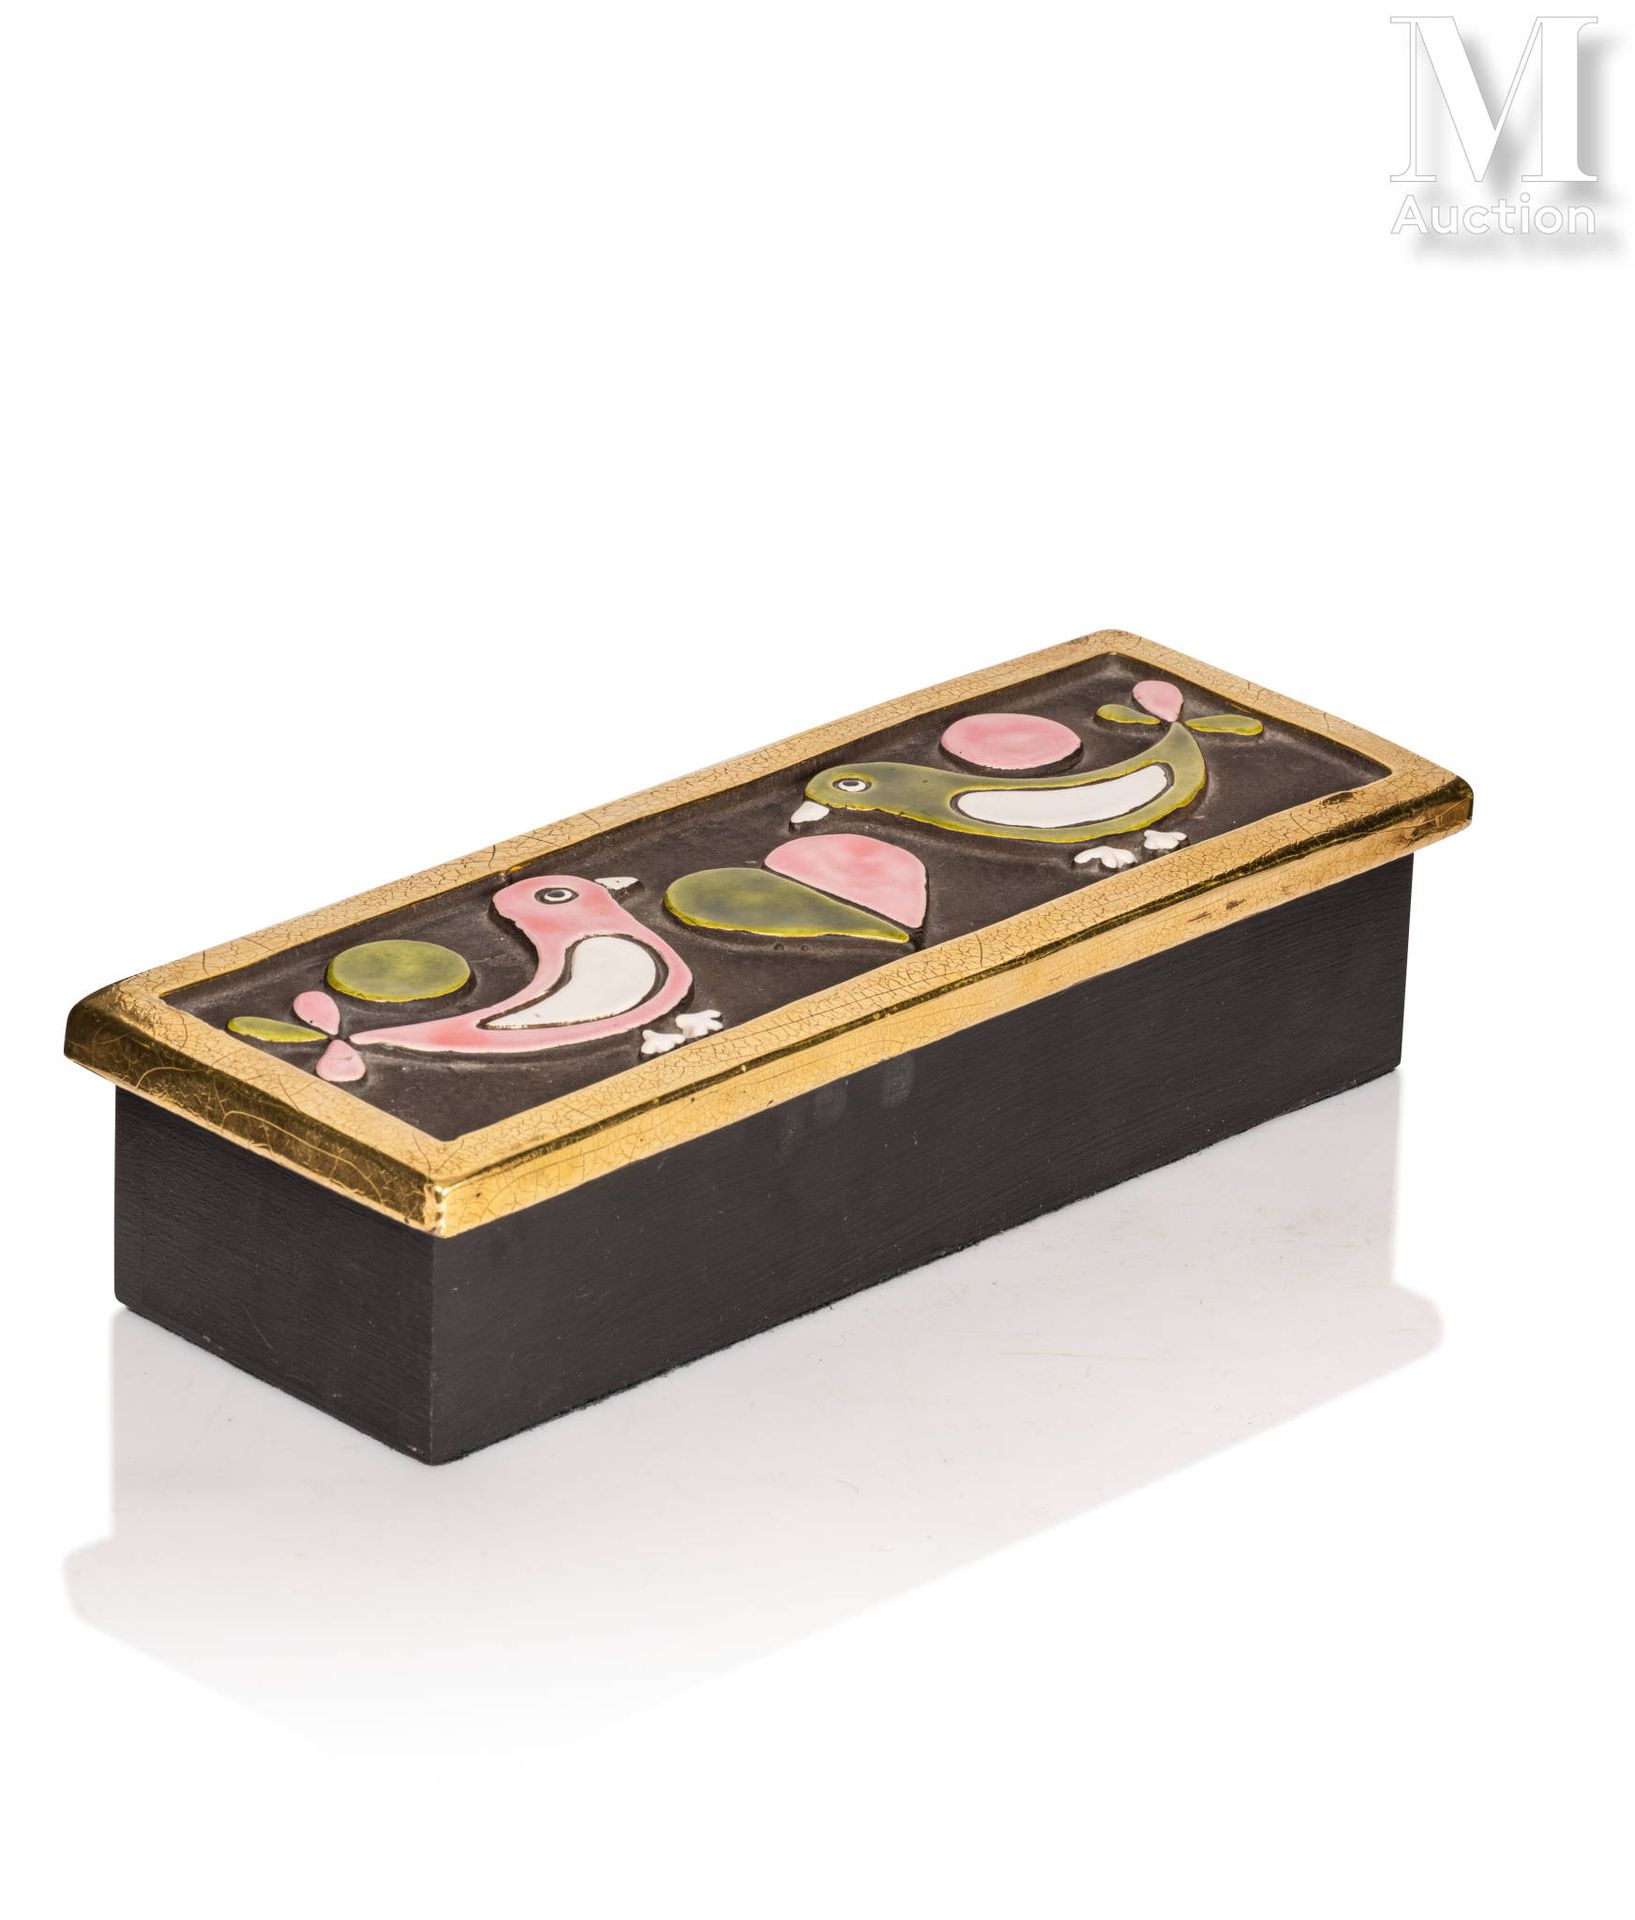 Mithe ESPELT (1923 - 2020) Wooden box with a lid in glazed ceramic, cracked and &hellip;